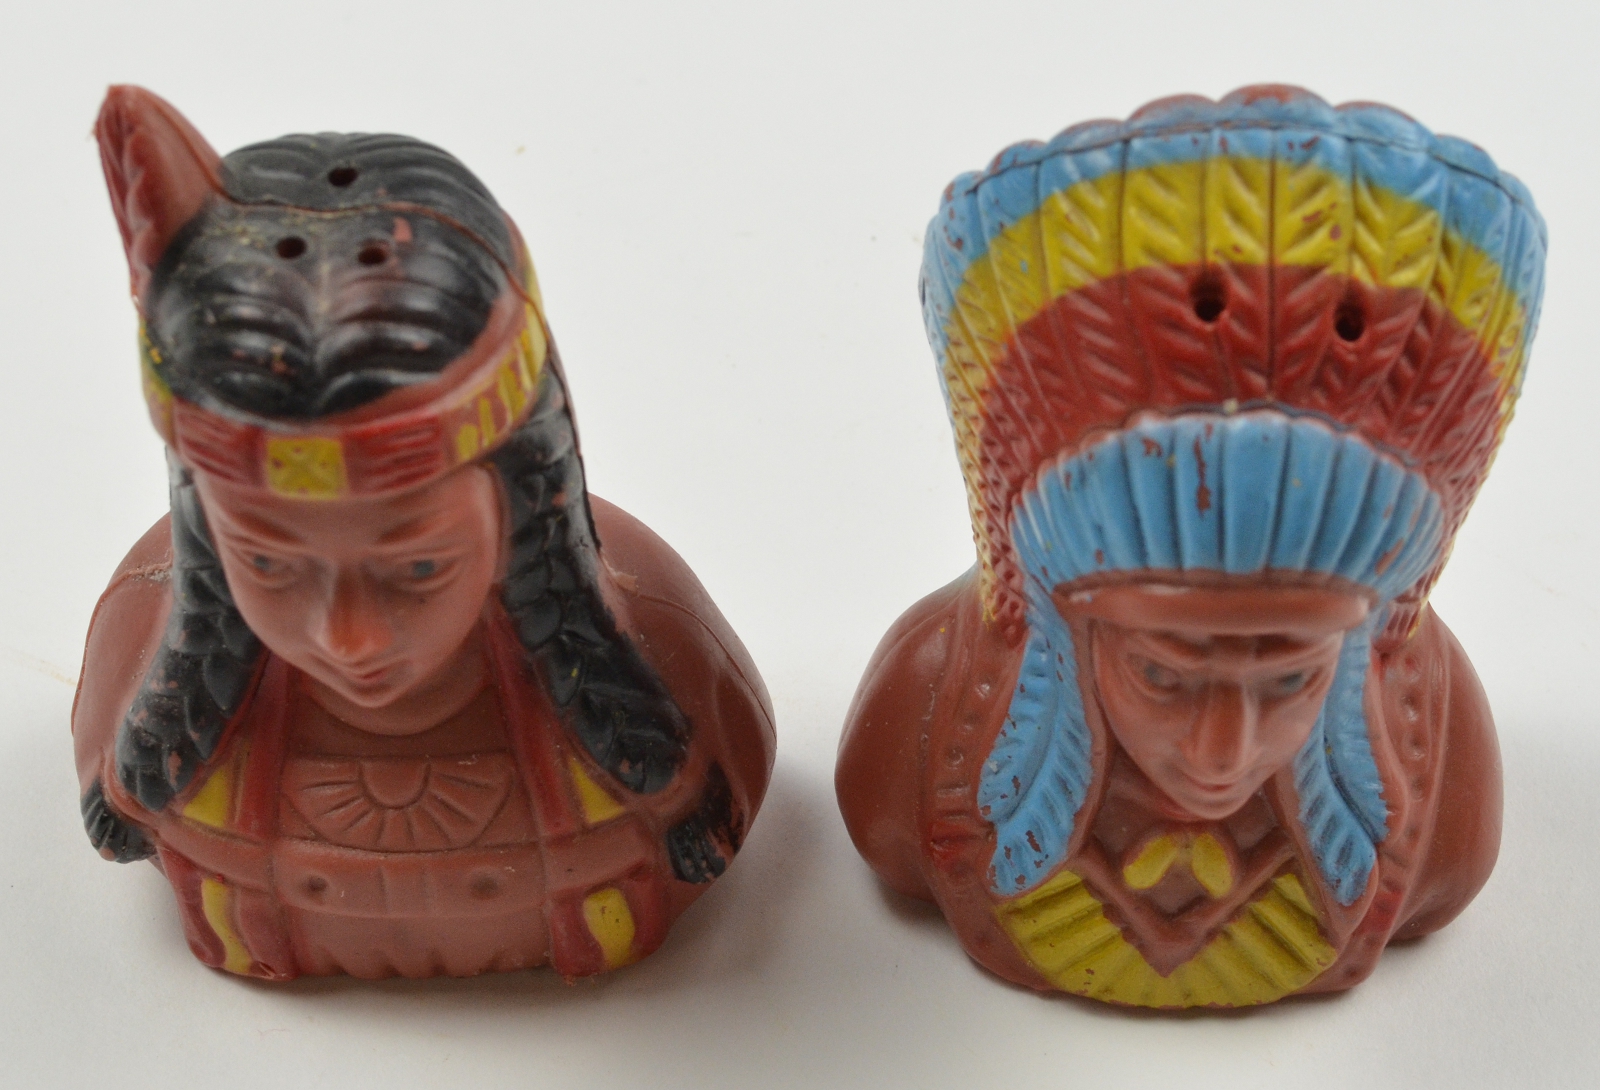 Vintage Native American Chief and Squaw Salt and Pepper Shakers